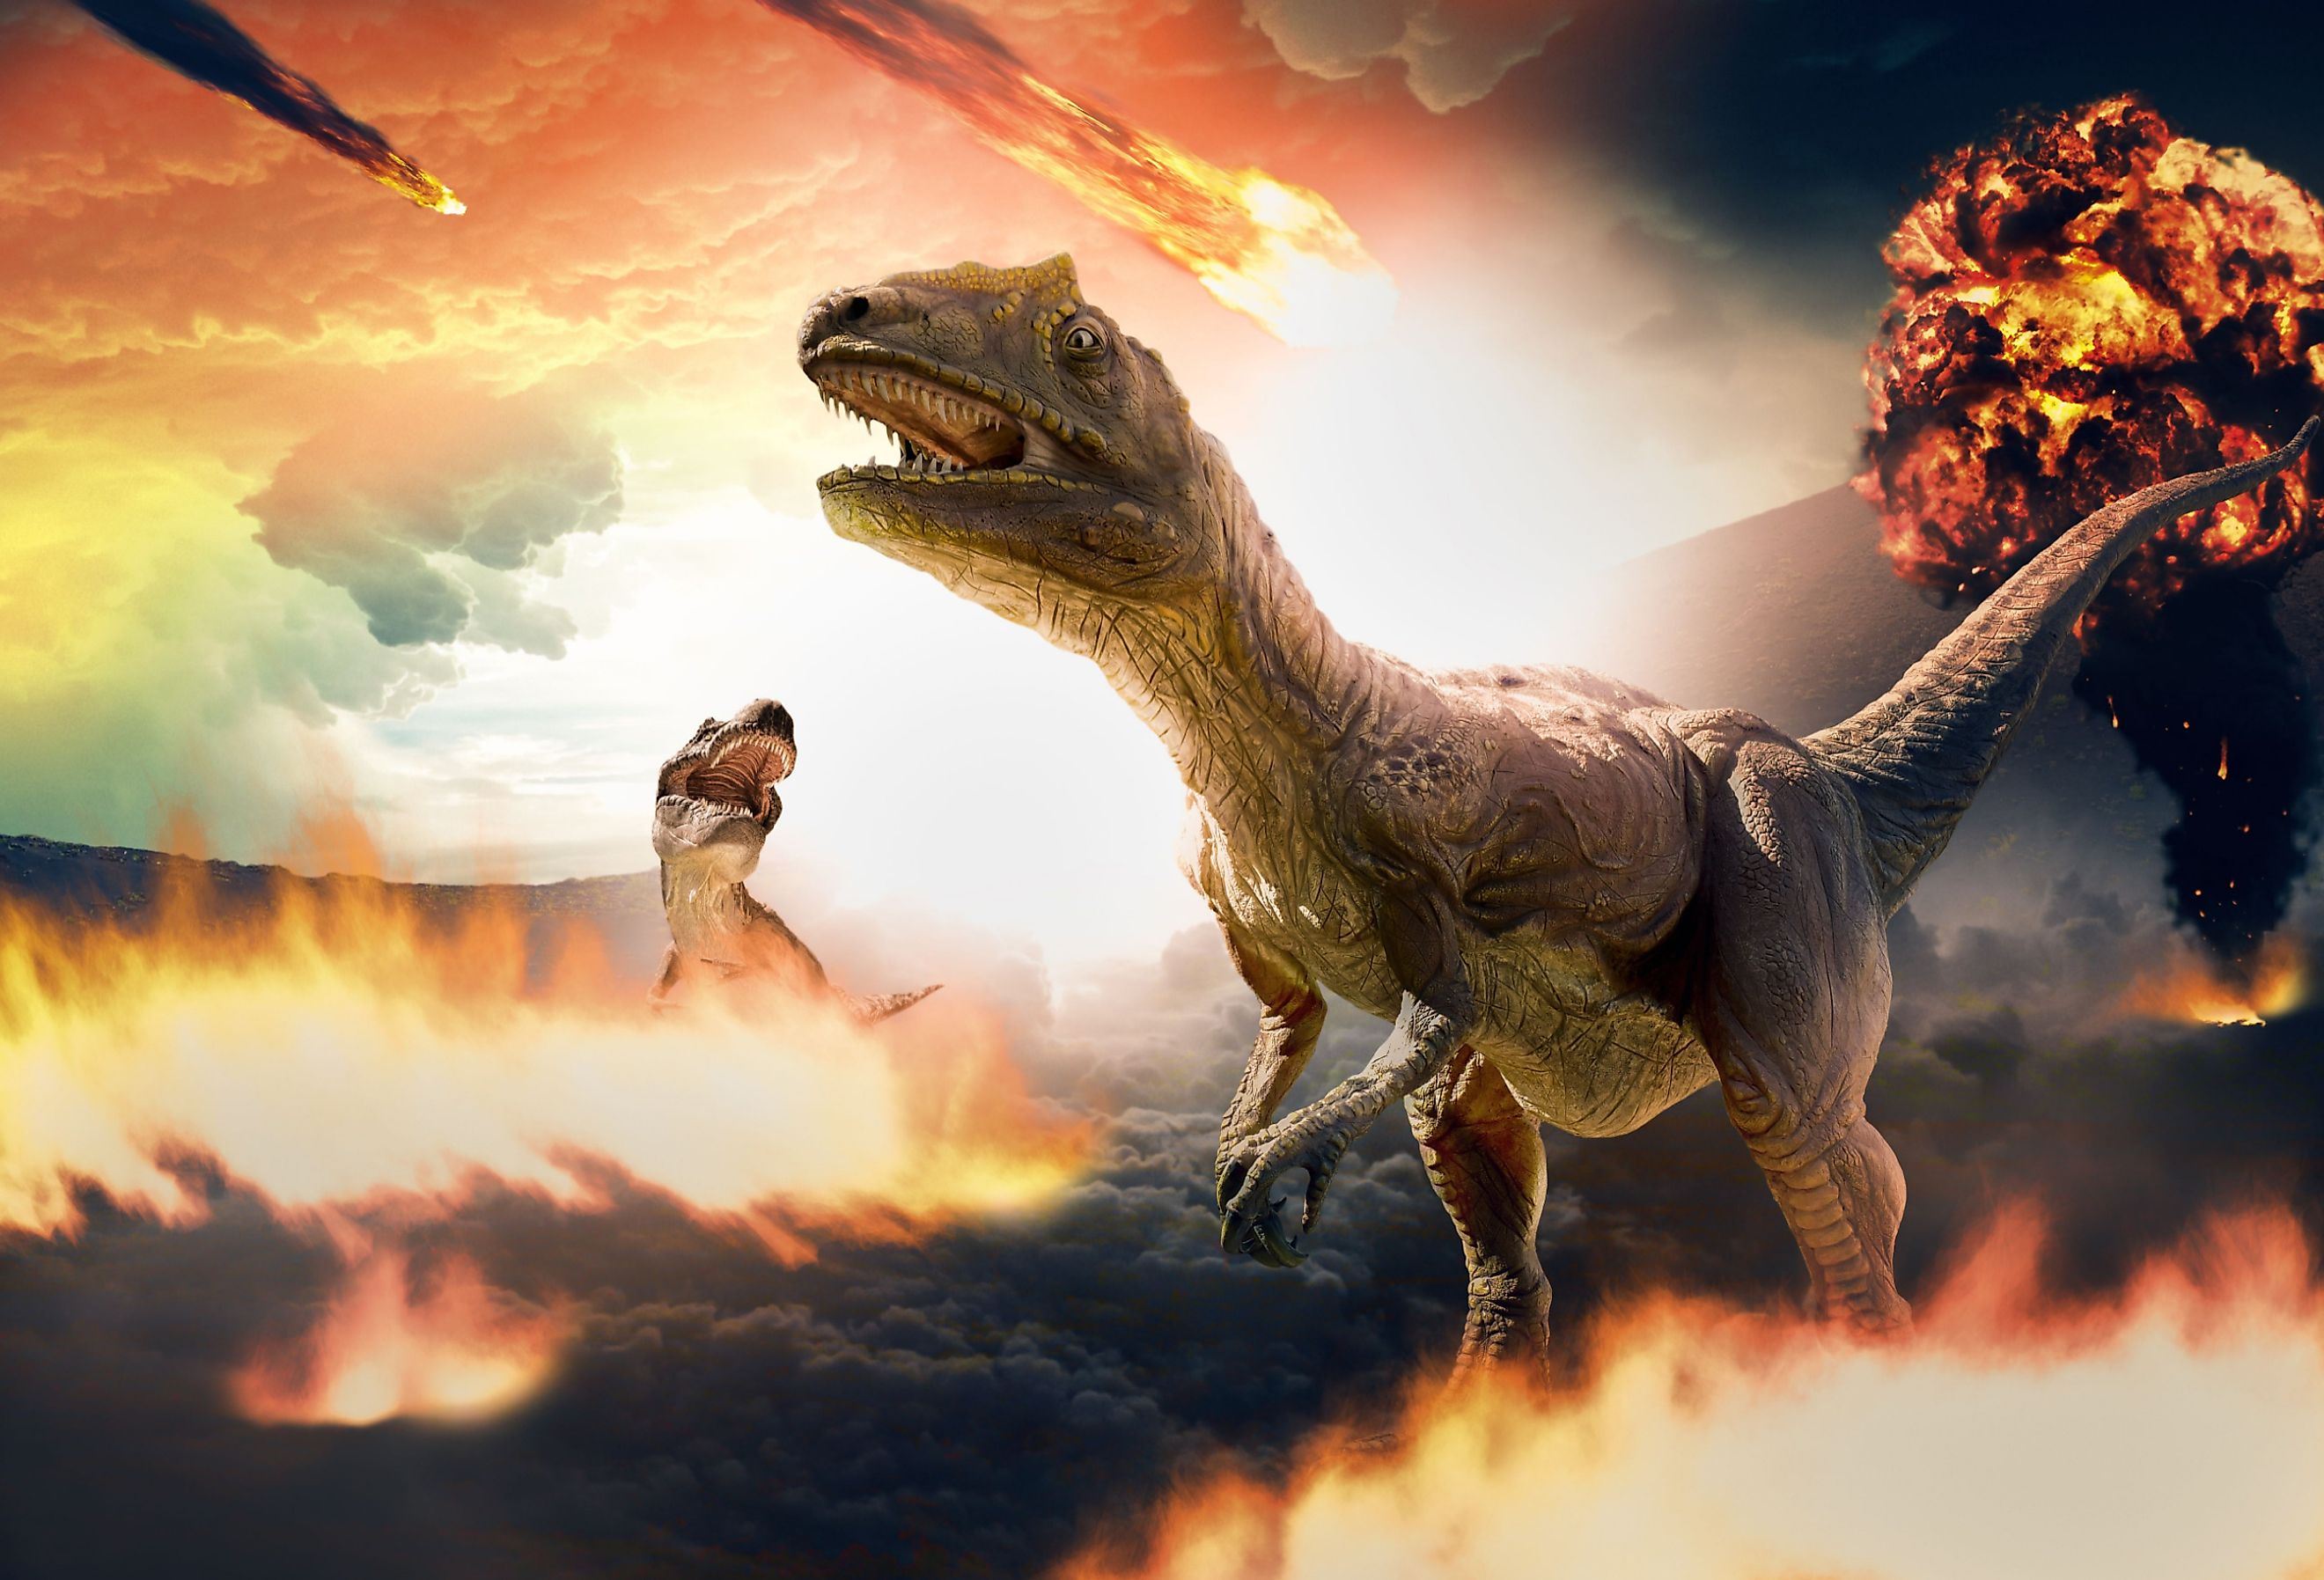 Dinosaurs and asteroids during the Cretaceous–Paleogene Extinction. Image credit serpeblu via Shutterstock